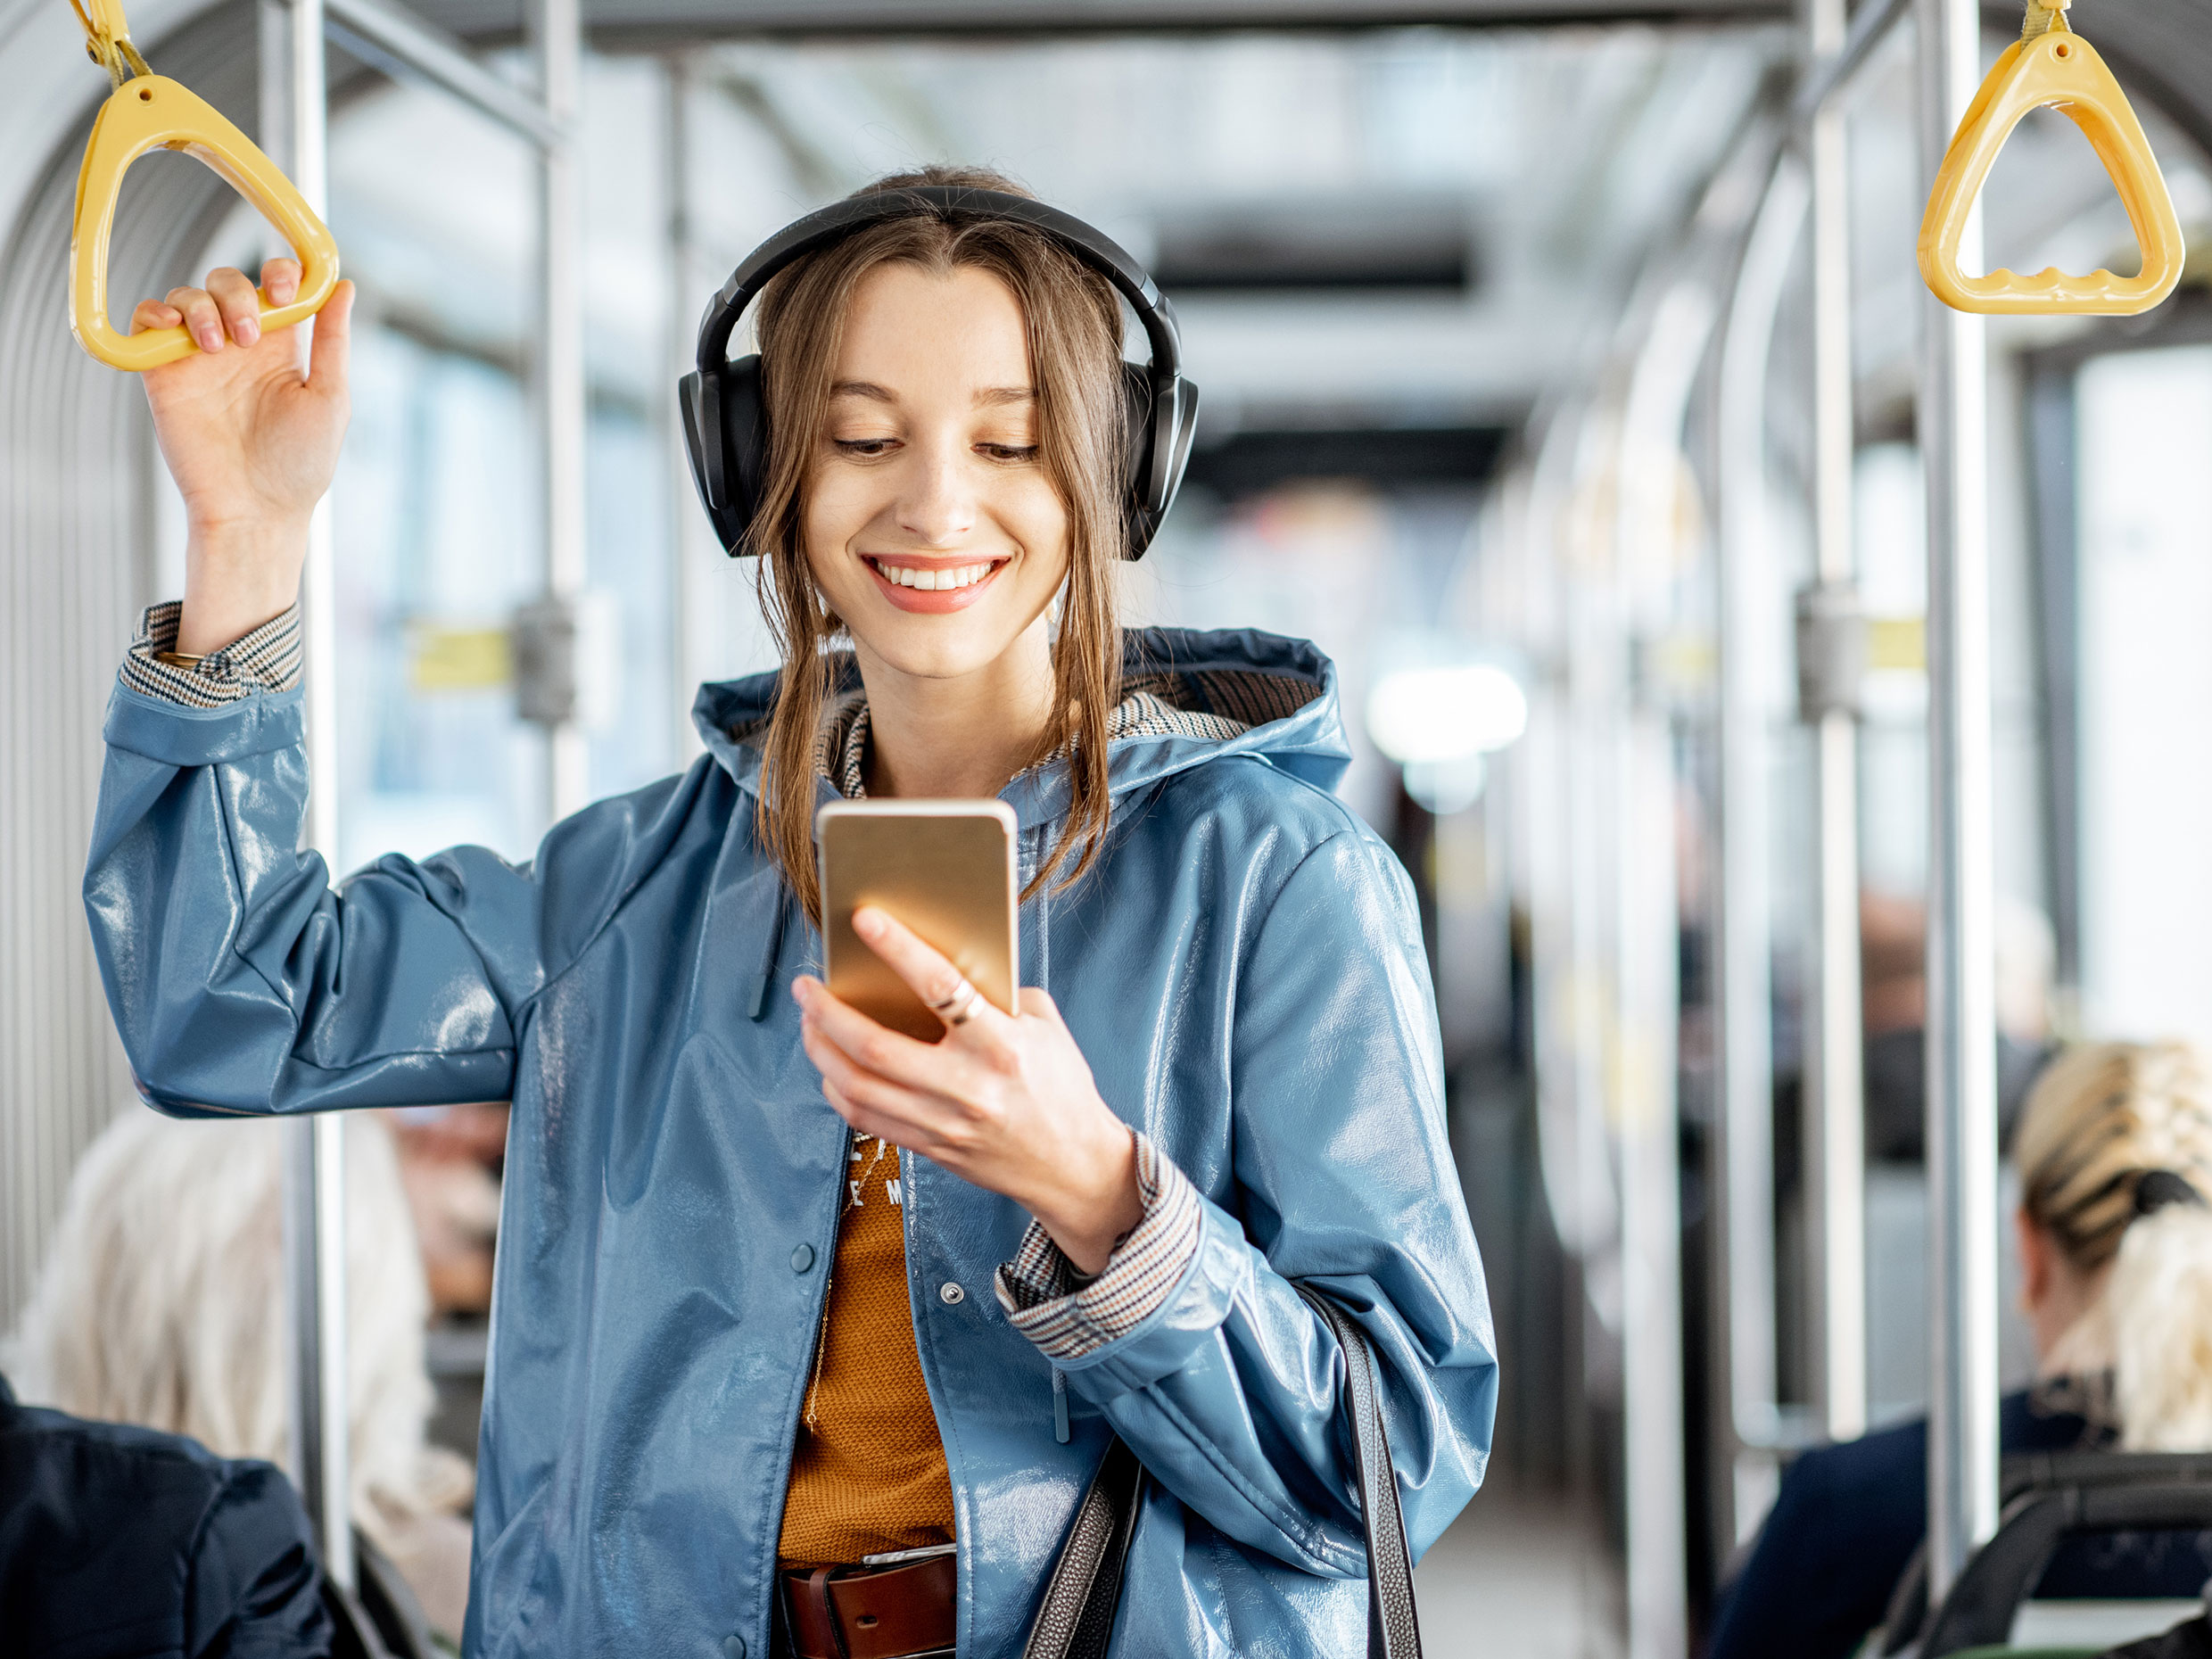 Student with headphones completing assignment on phone while riding public transport.